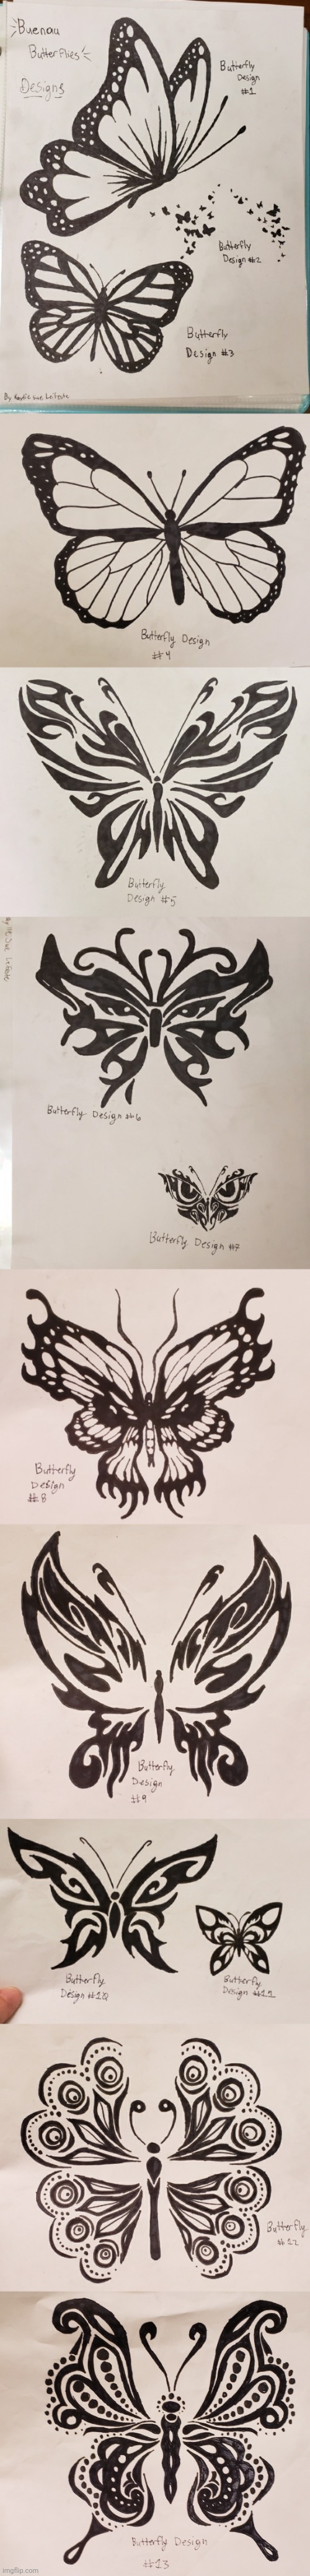 I made some butterfly designs for my team class cuz my teacher wants to make shirts lmao | made w/ Imgflip meme maker